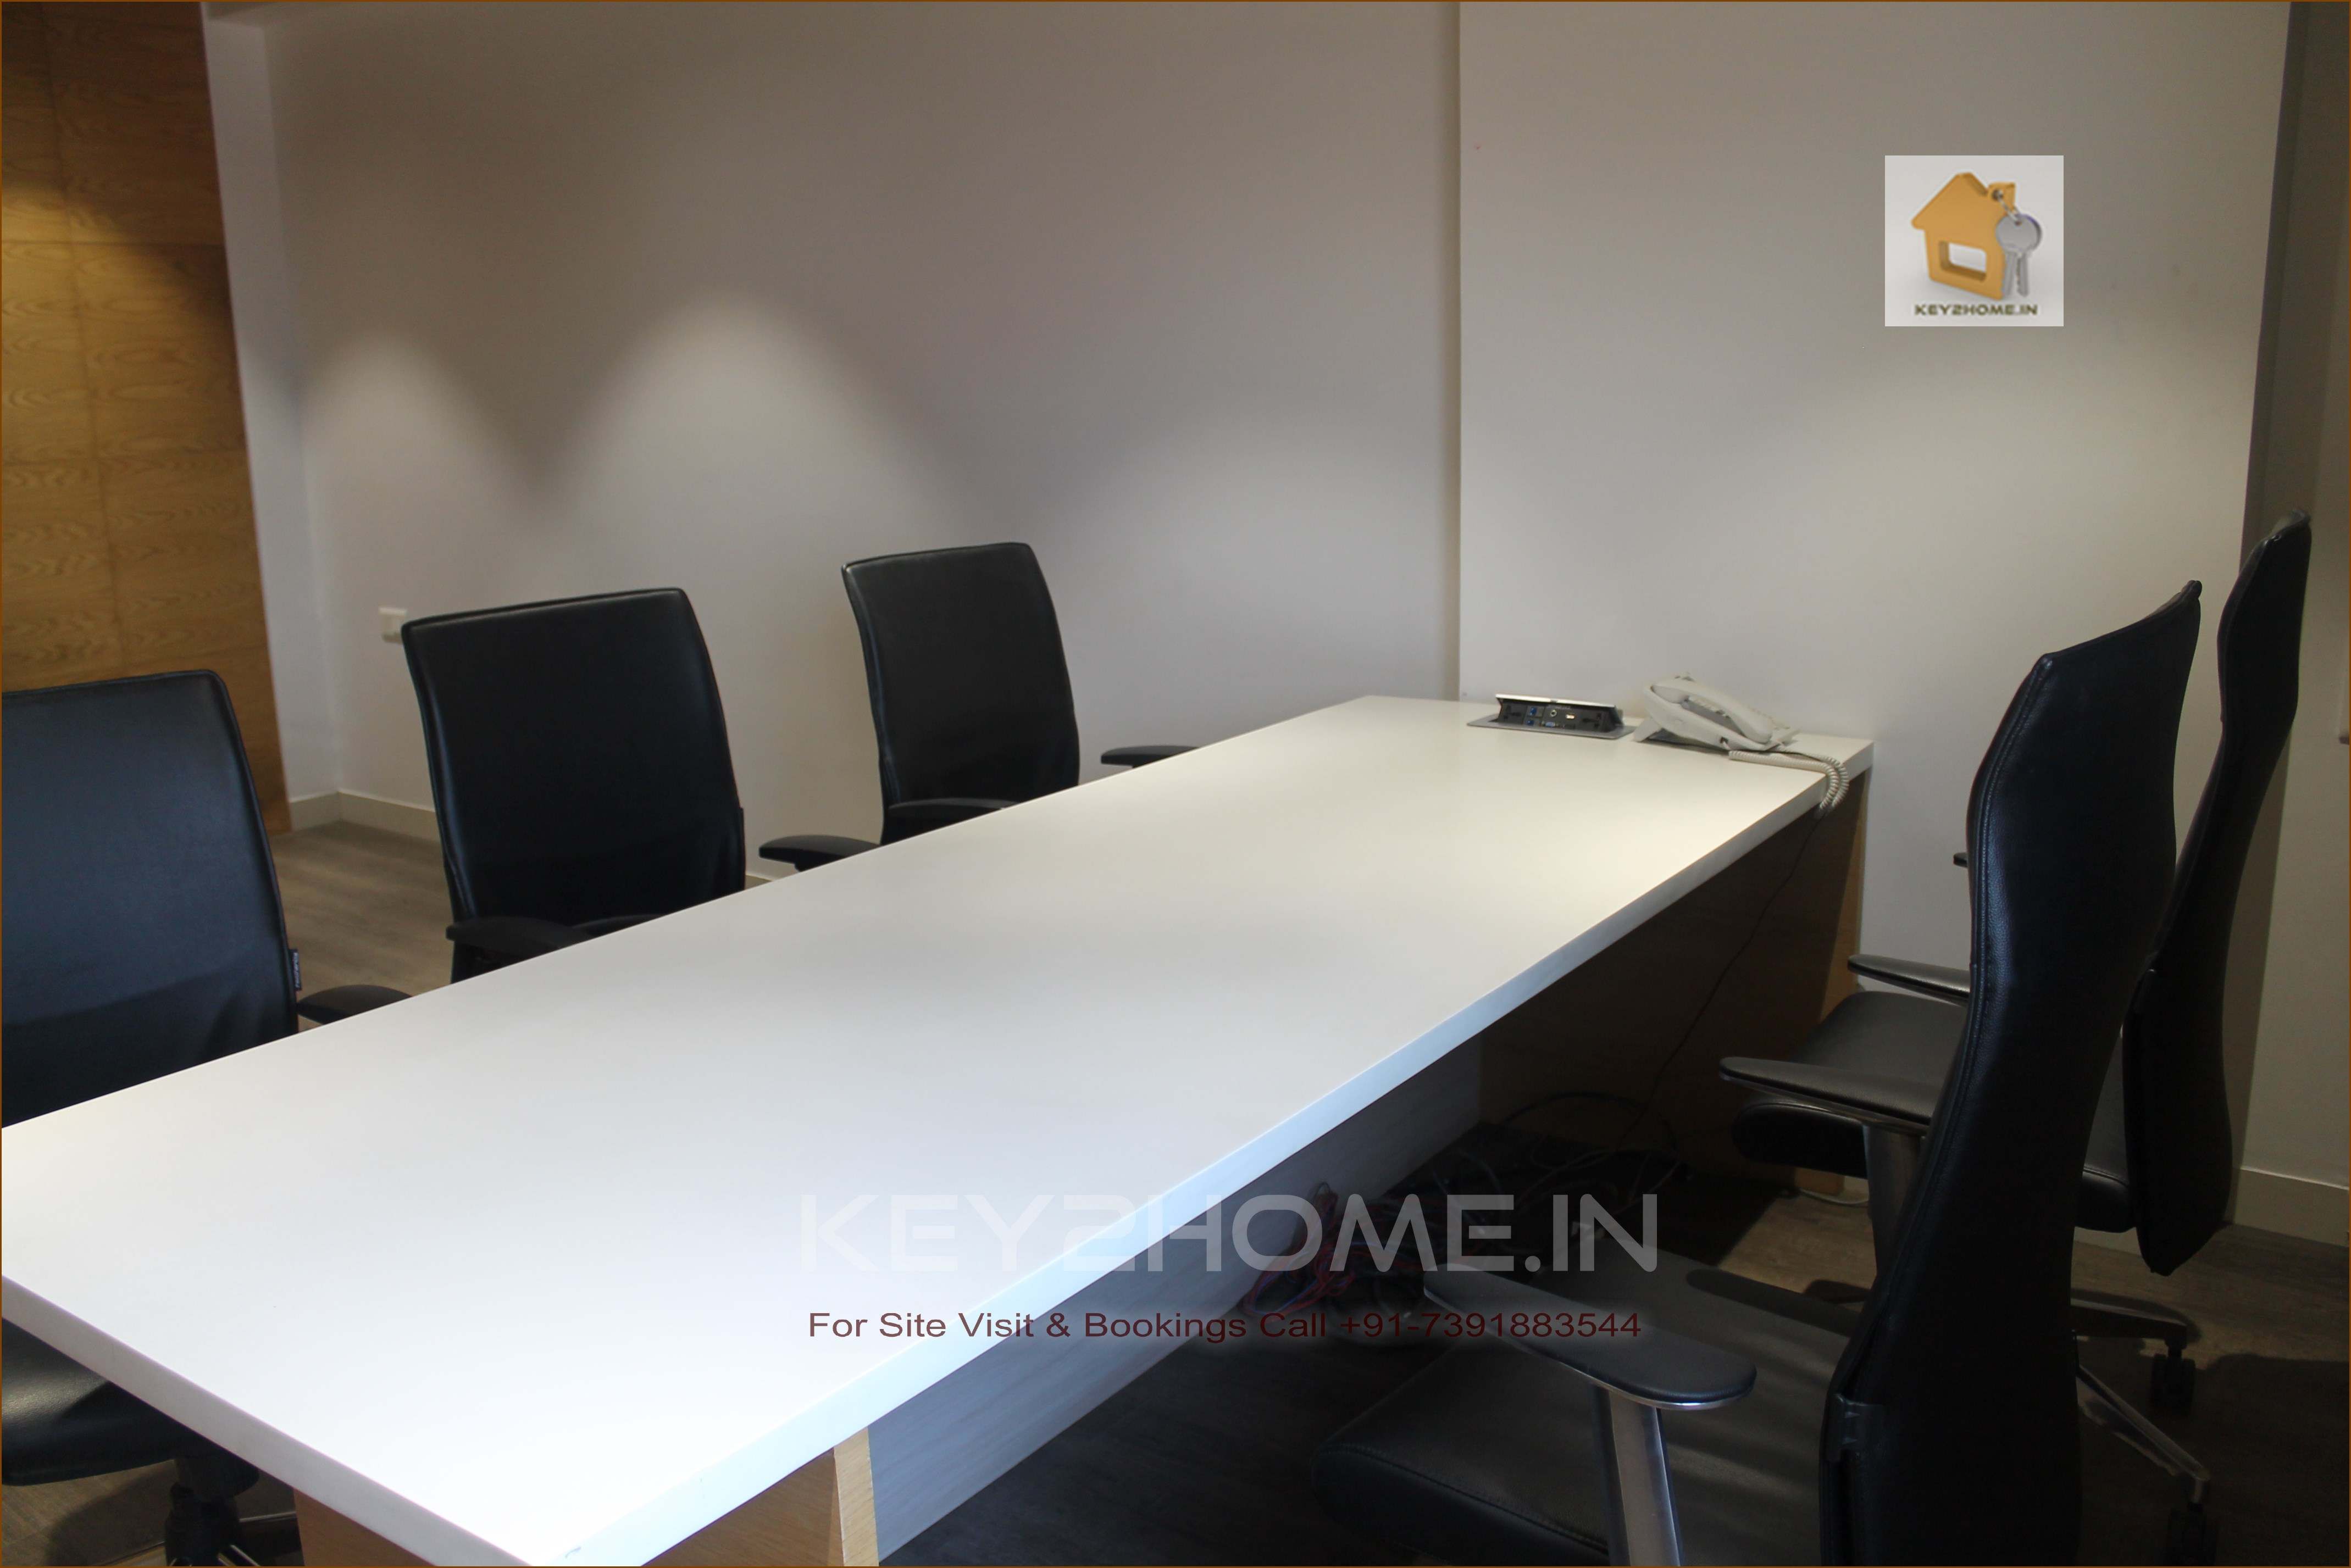 Commercial Office space on rent in Hinjewadi near wakad bridge Manager cabin large space